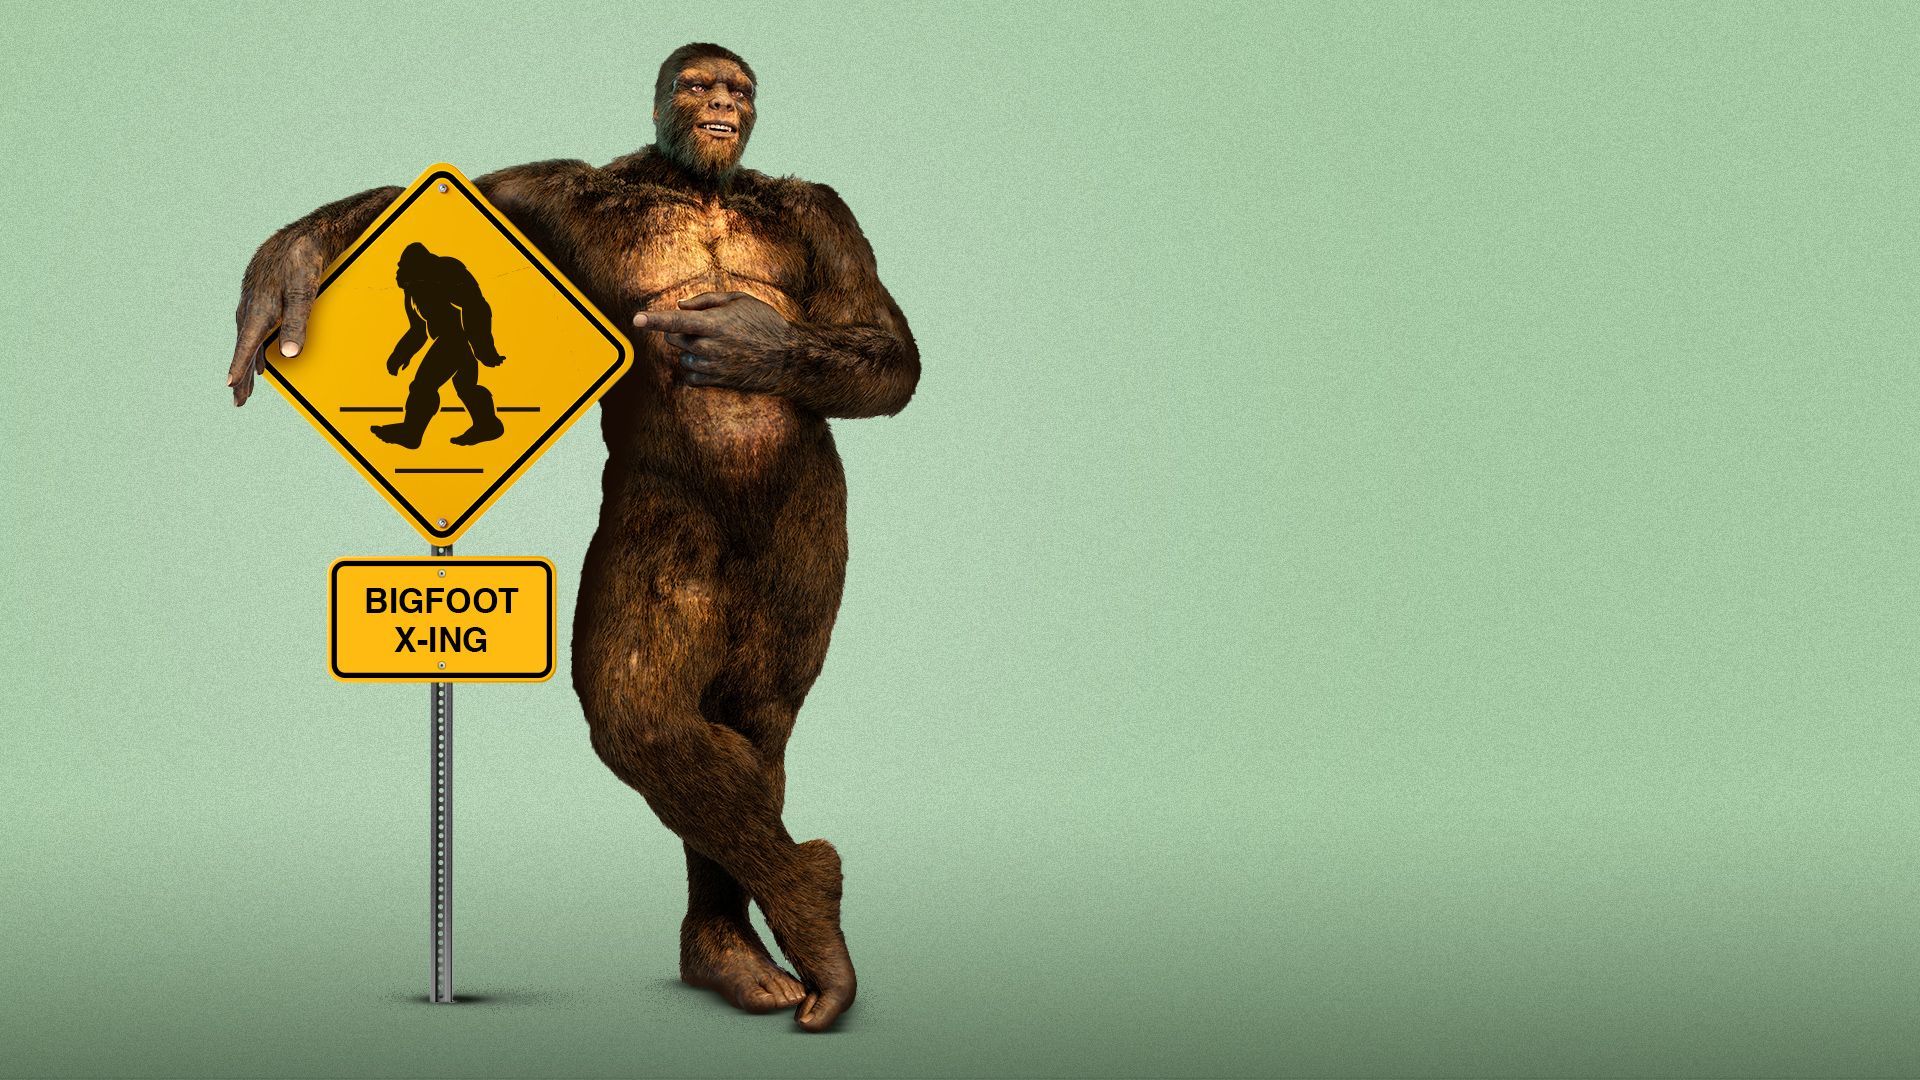 Illustration of a Sasquatch with its arm around a sign that says, "BIGFOOT X-ING".